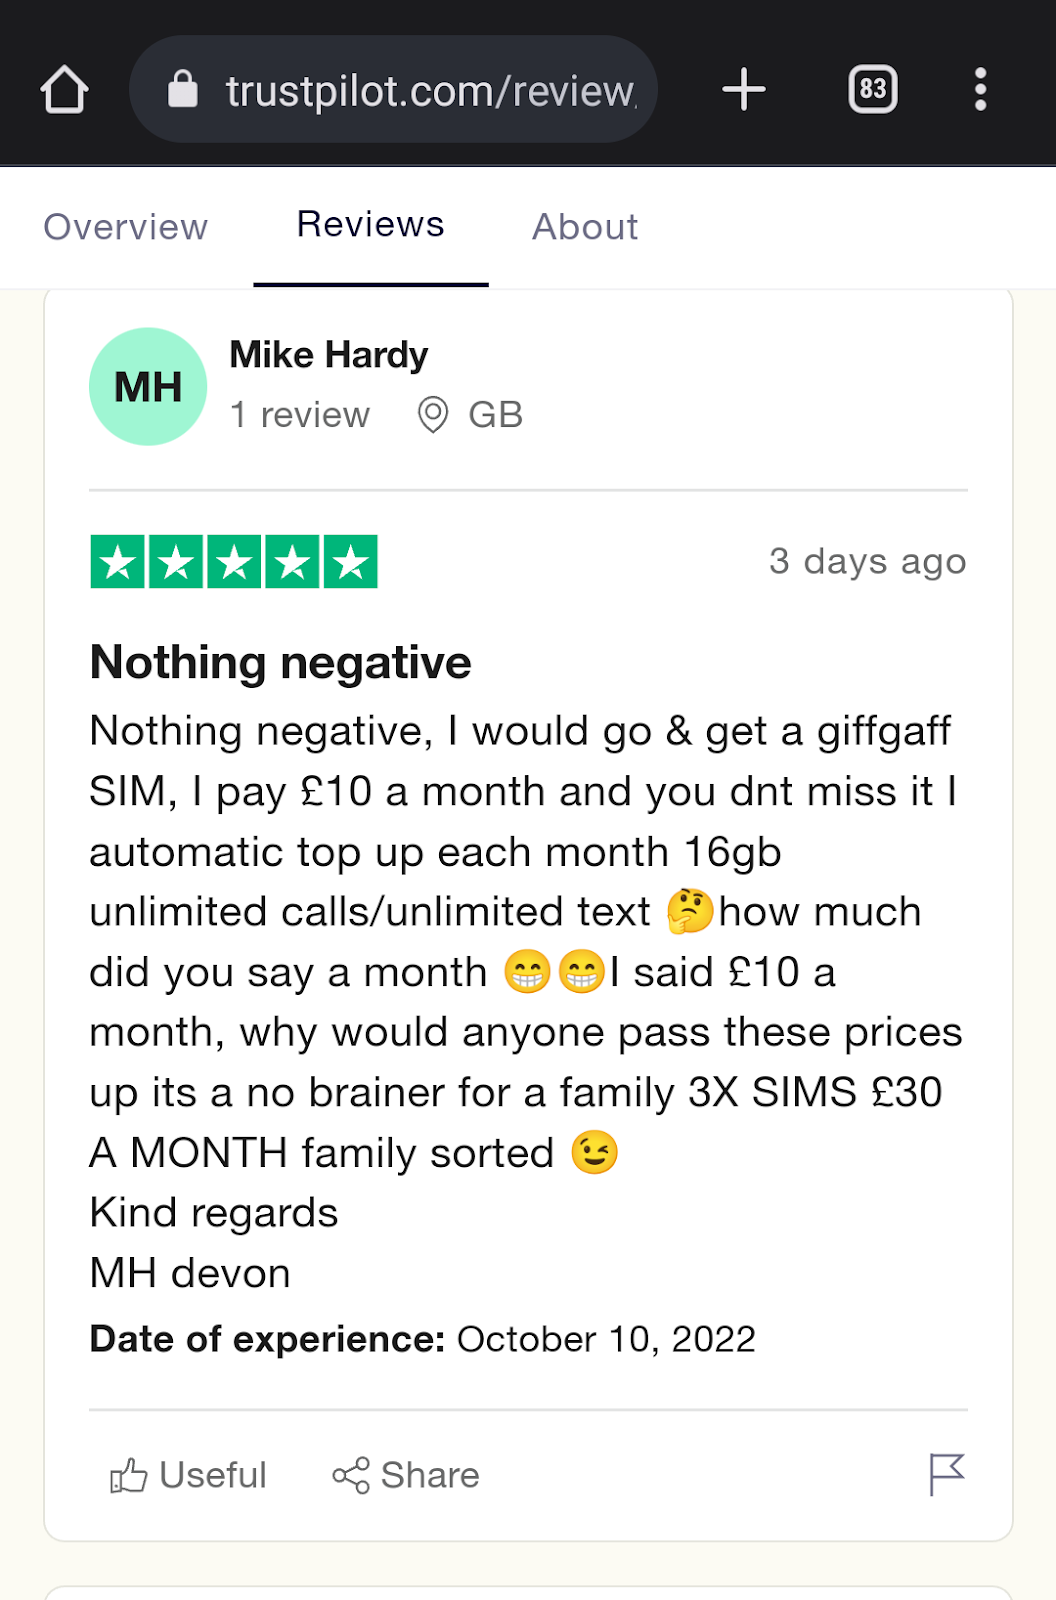 giffgaff Network Phone Service Reviews On Trustpilot